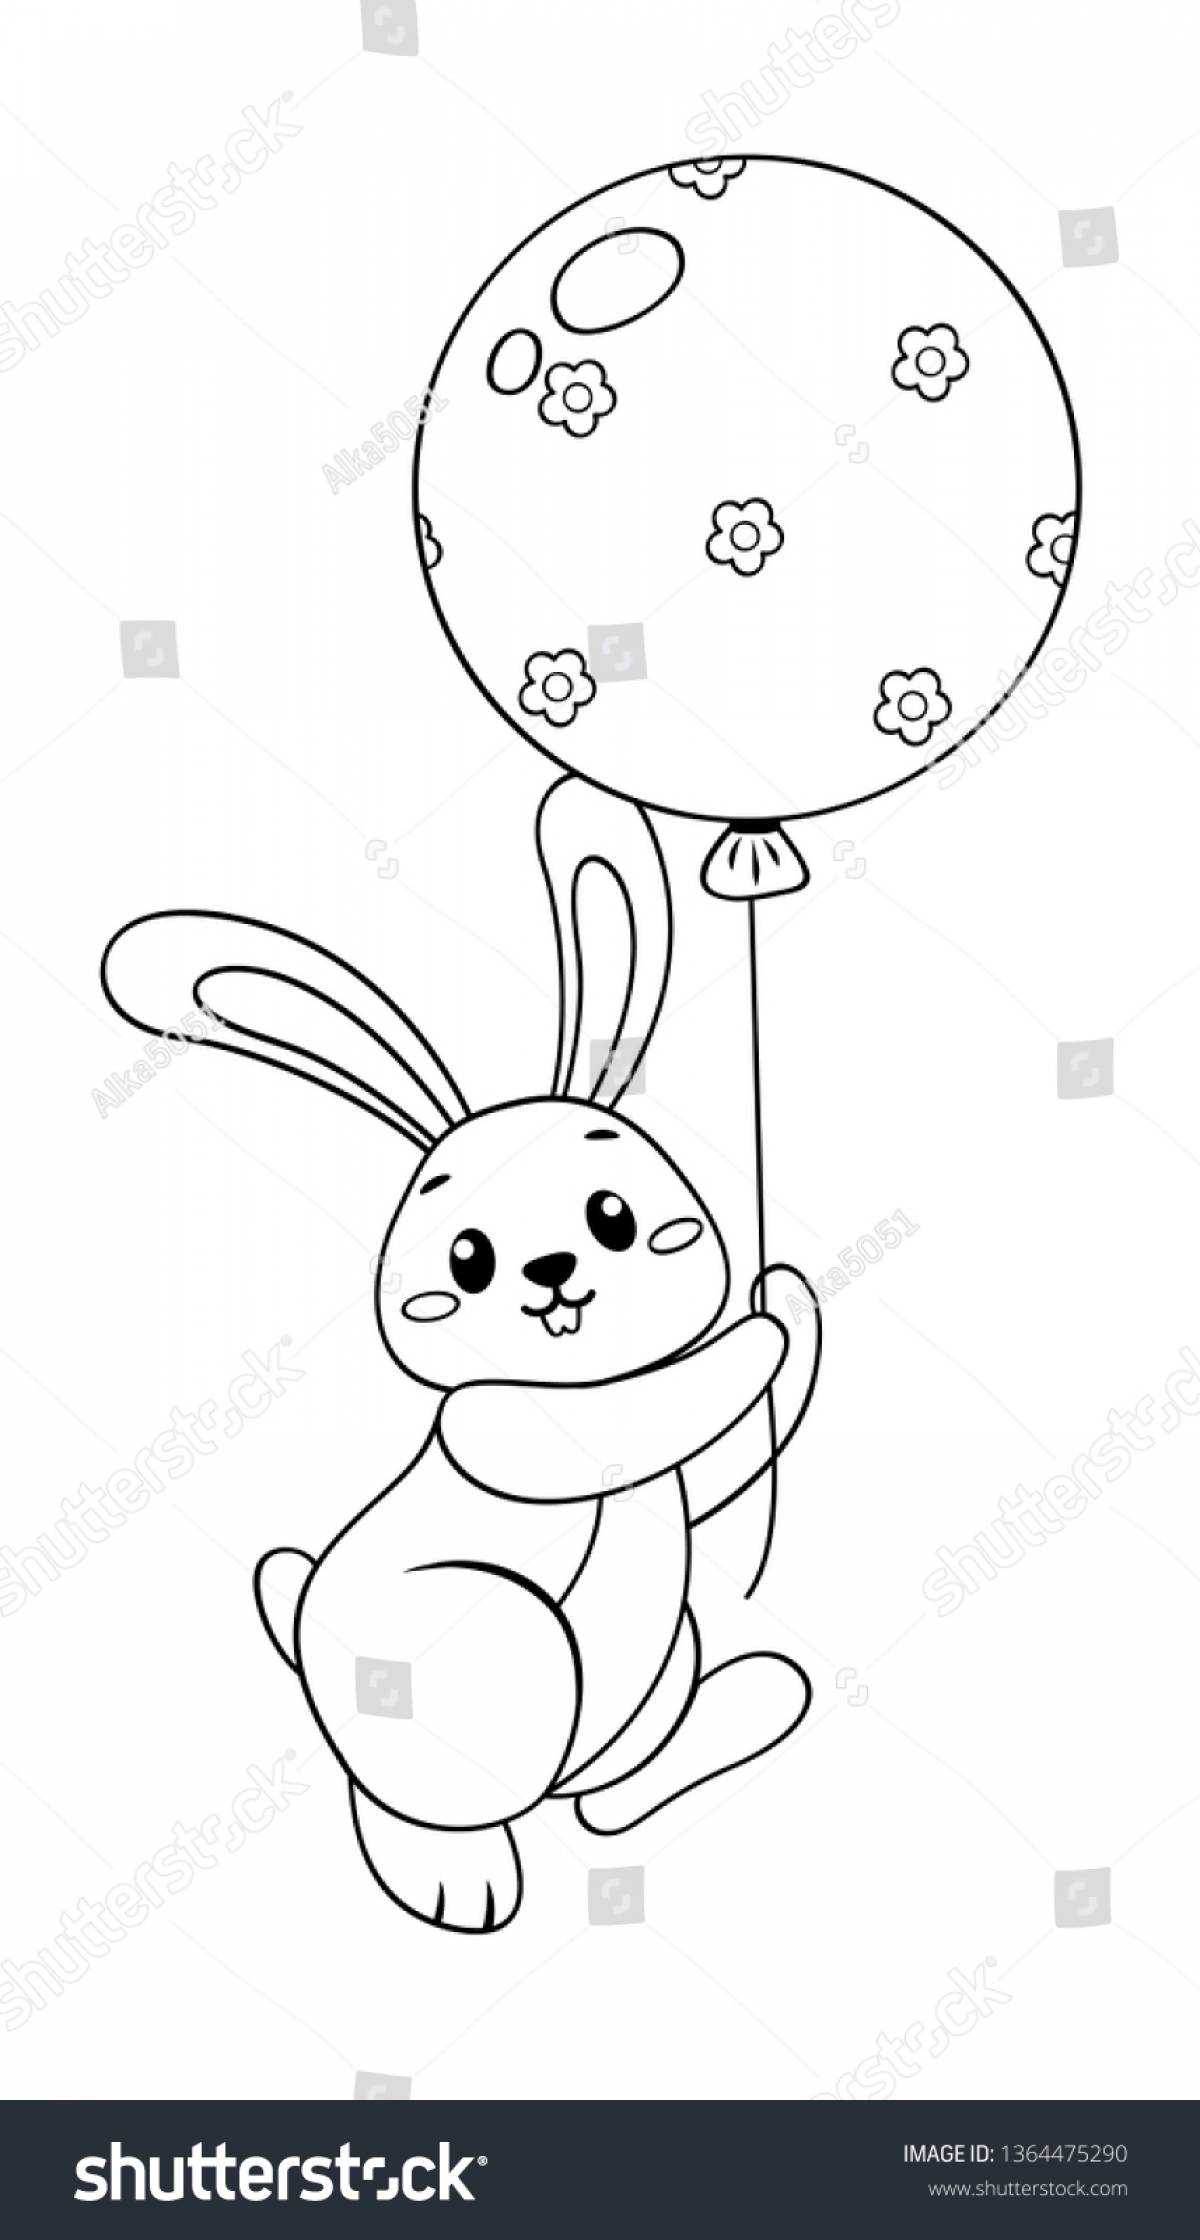 Bunny with balloons #6